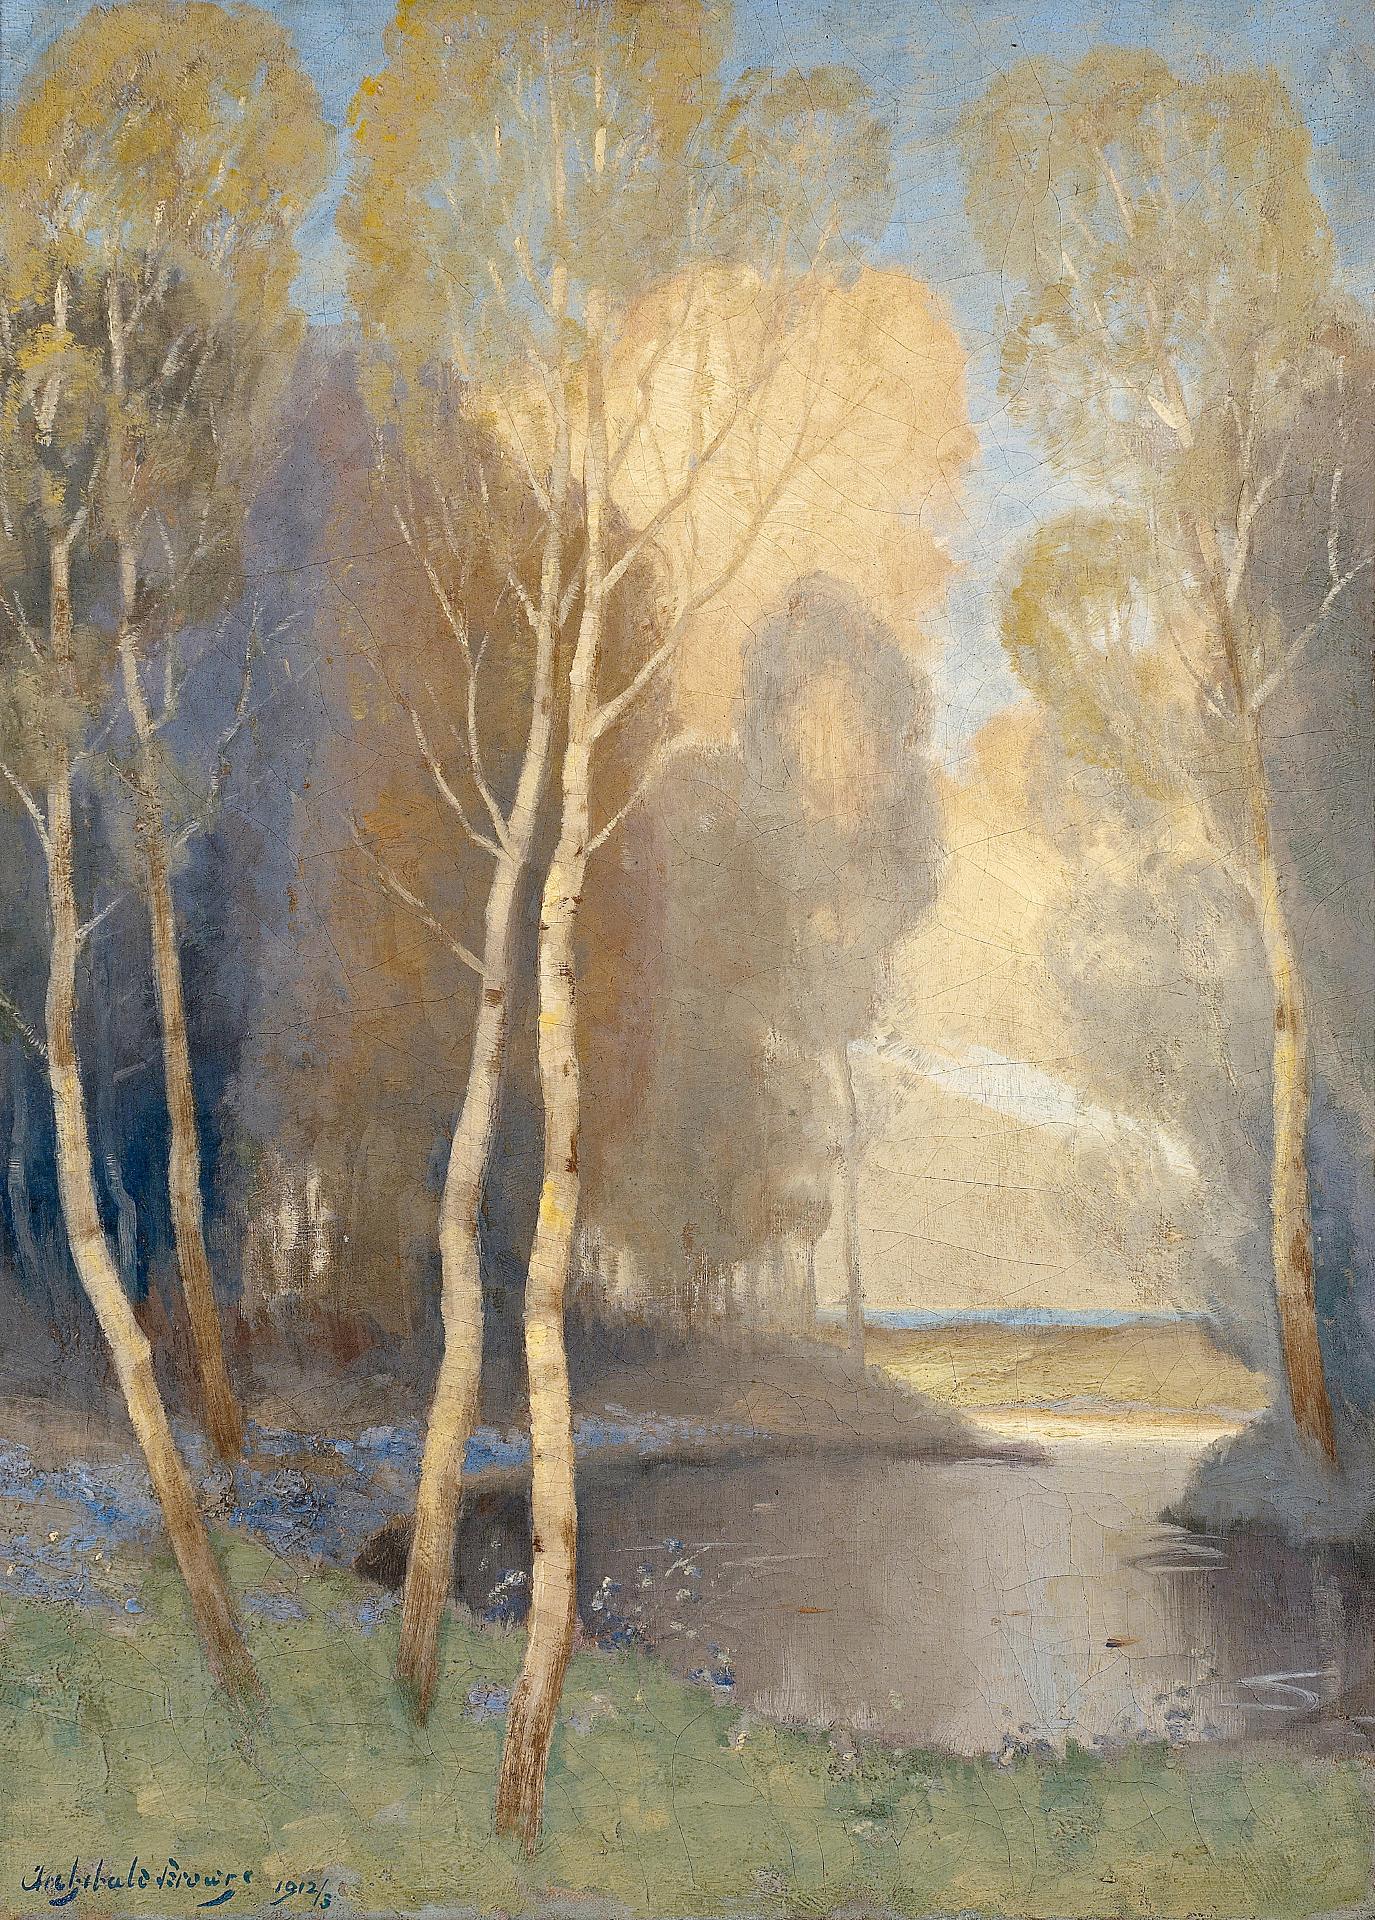 Joseph Archibald Browne (1862-1948) - The Forest Pool